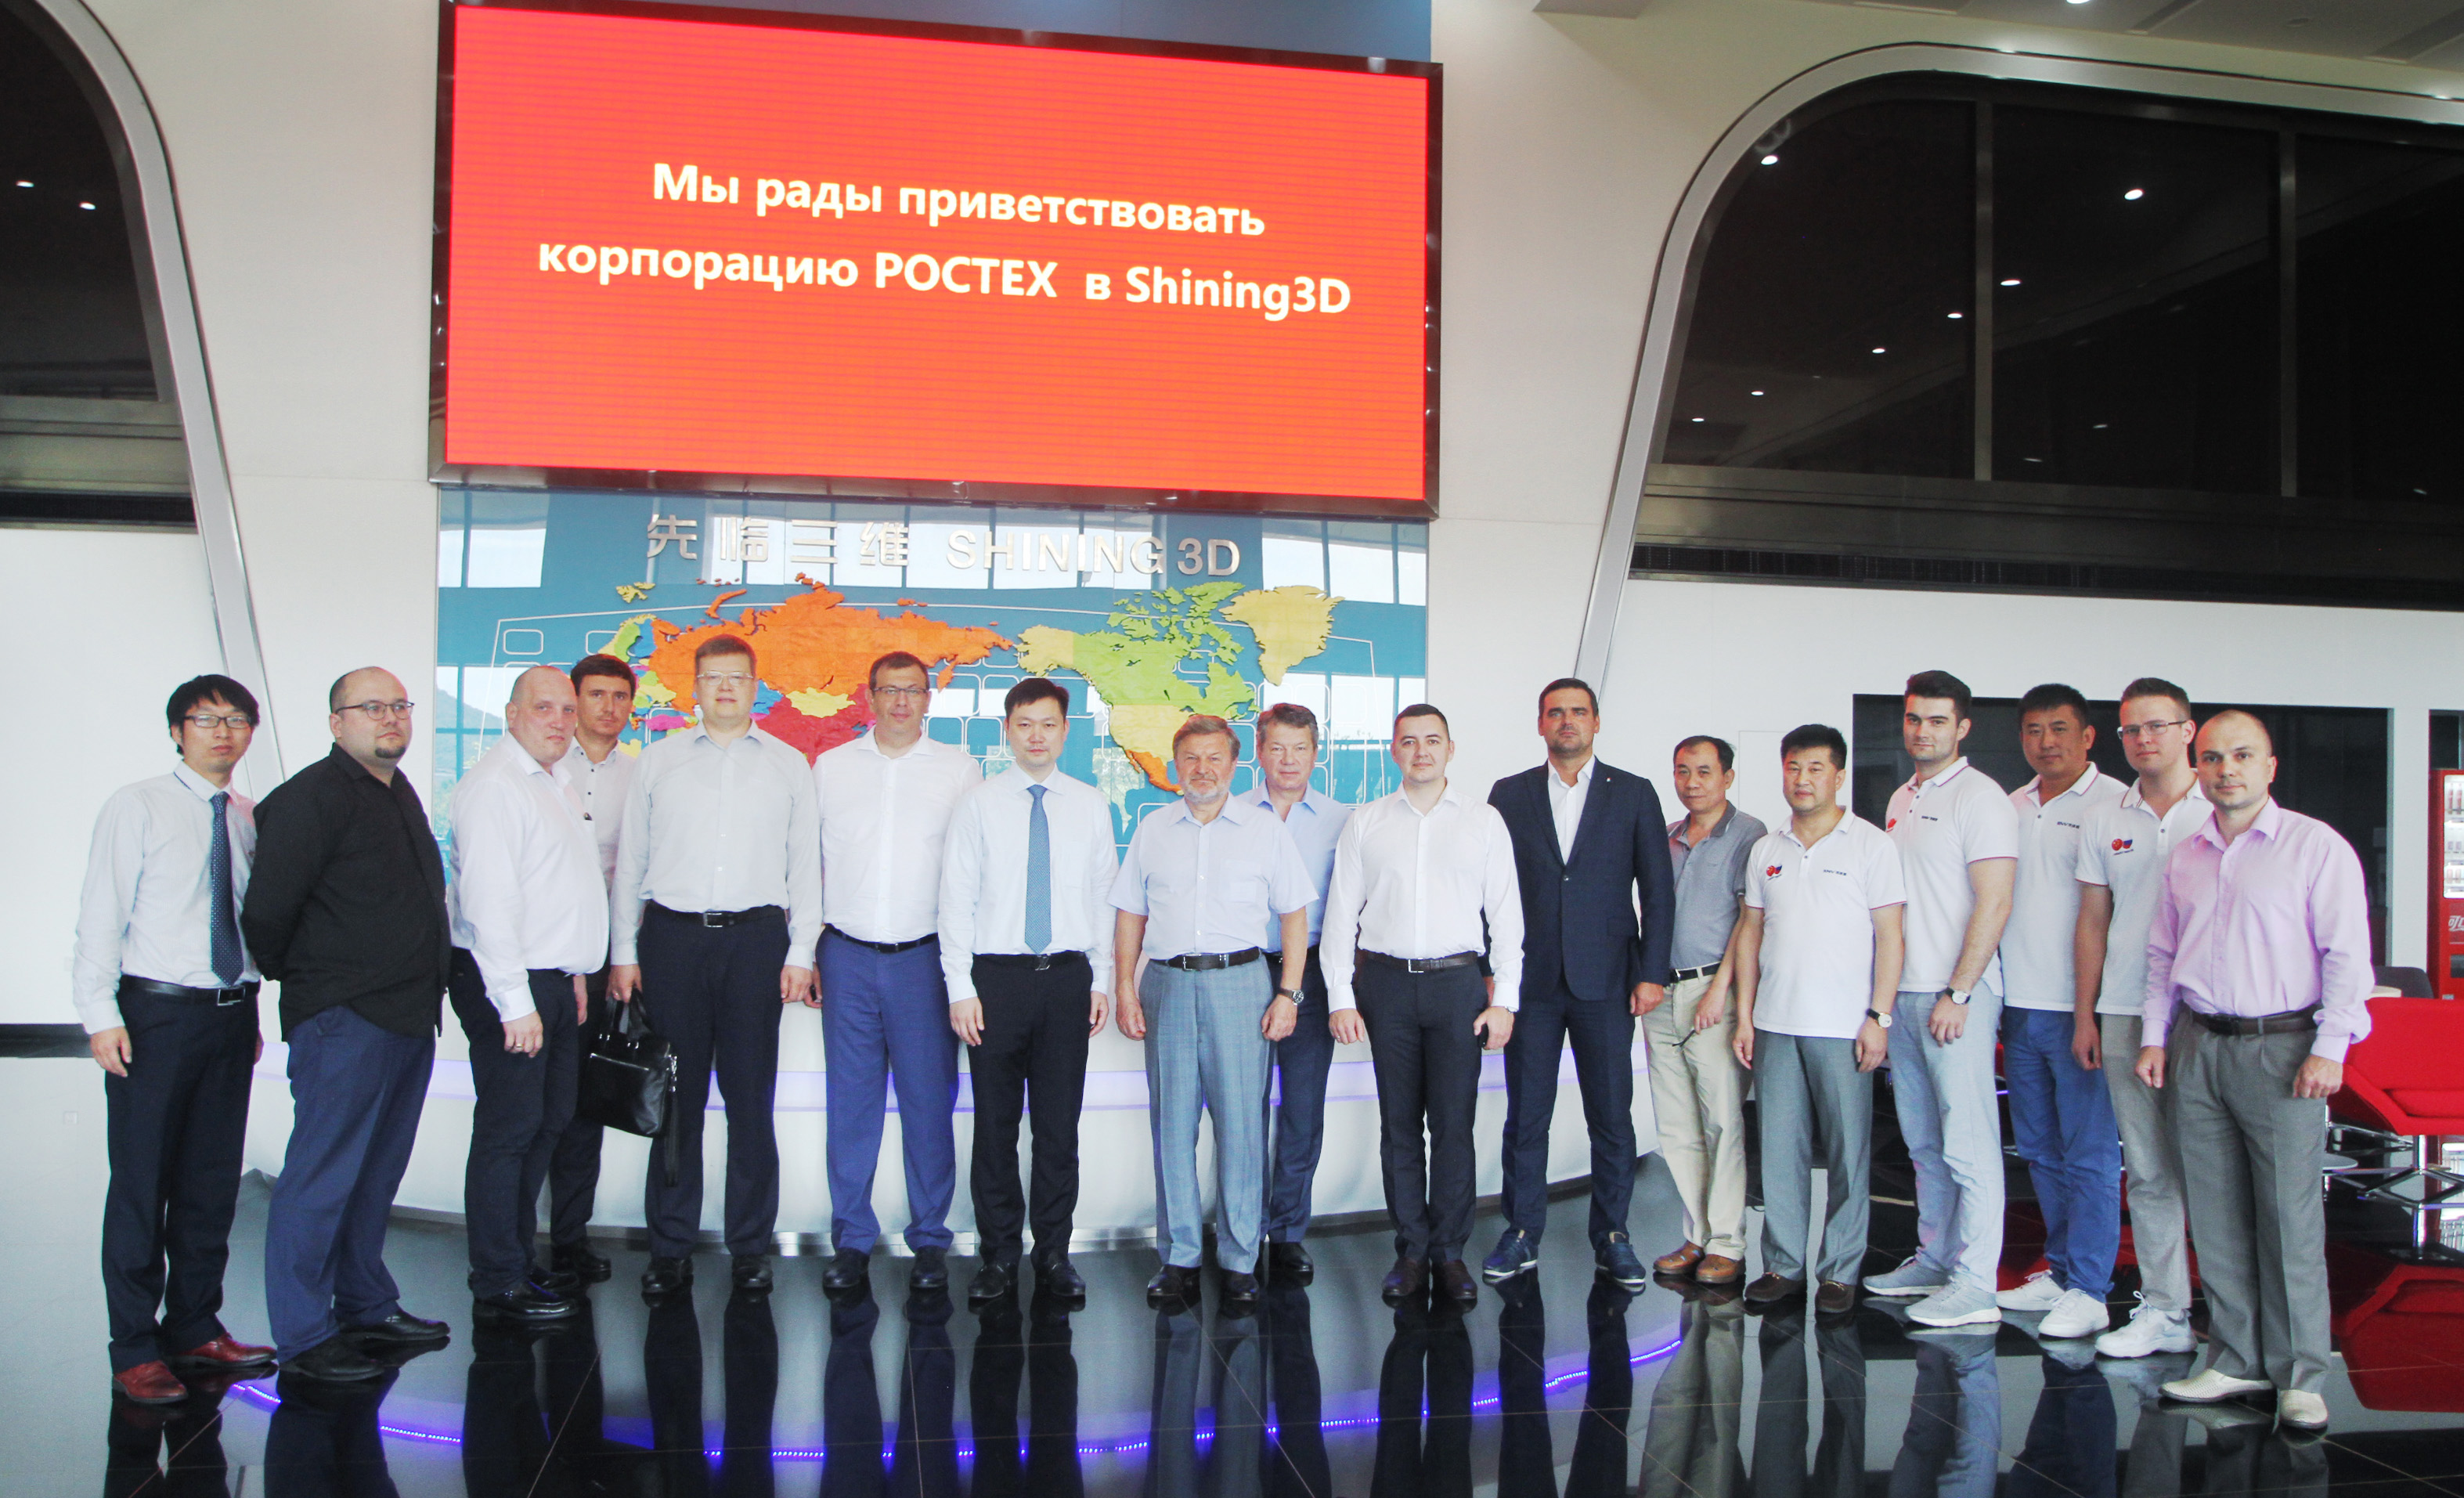 Russian Science and Technology Group visited the Institute